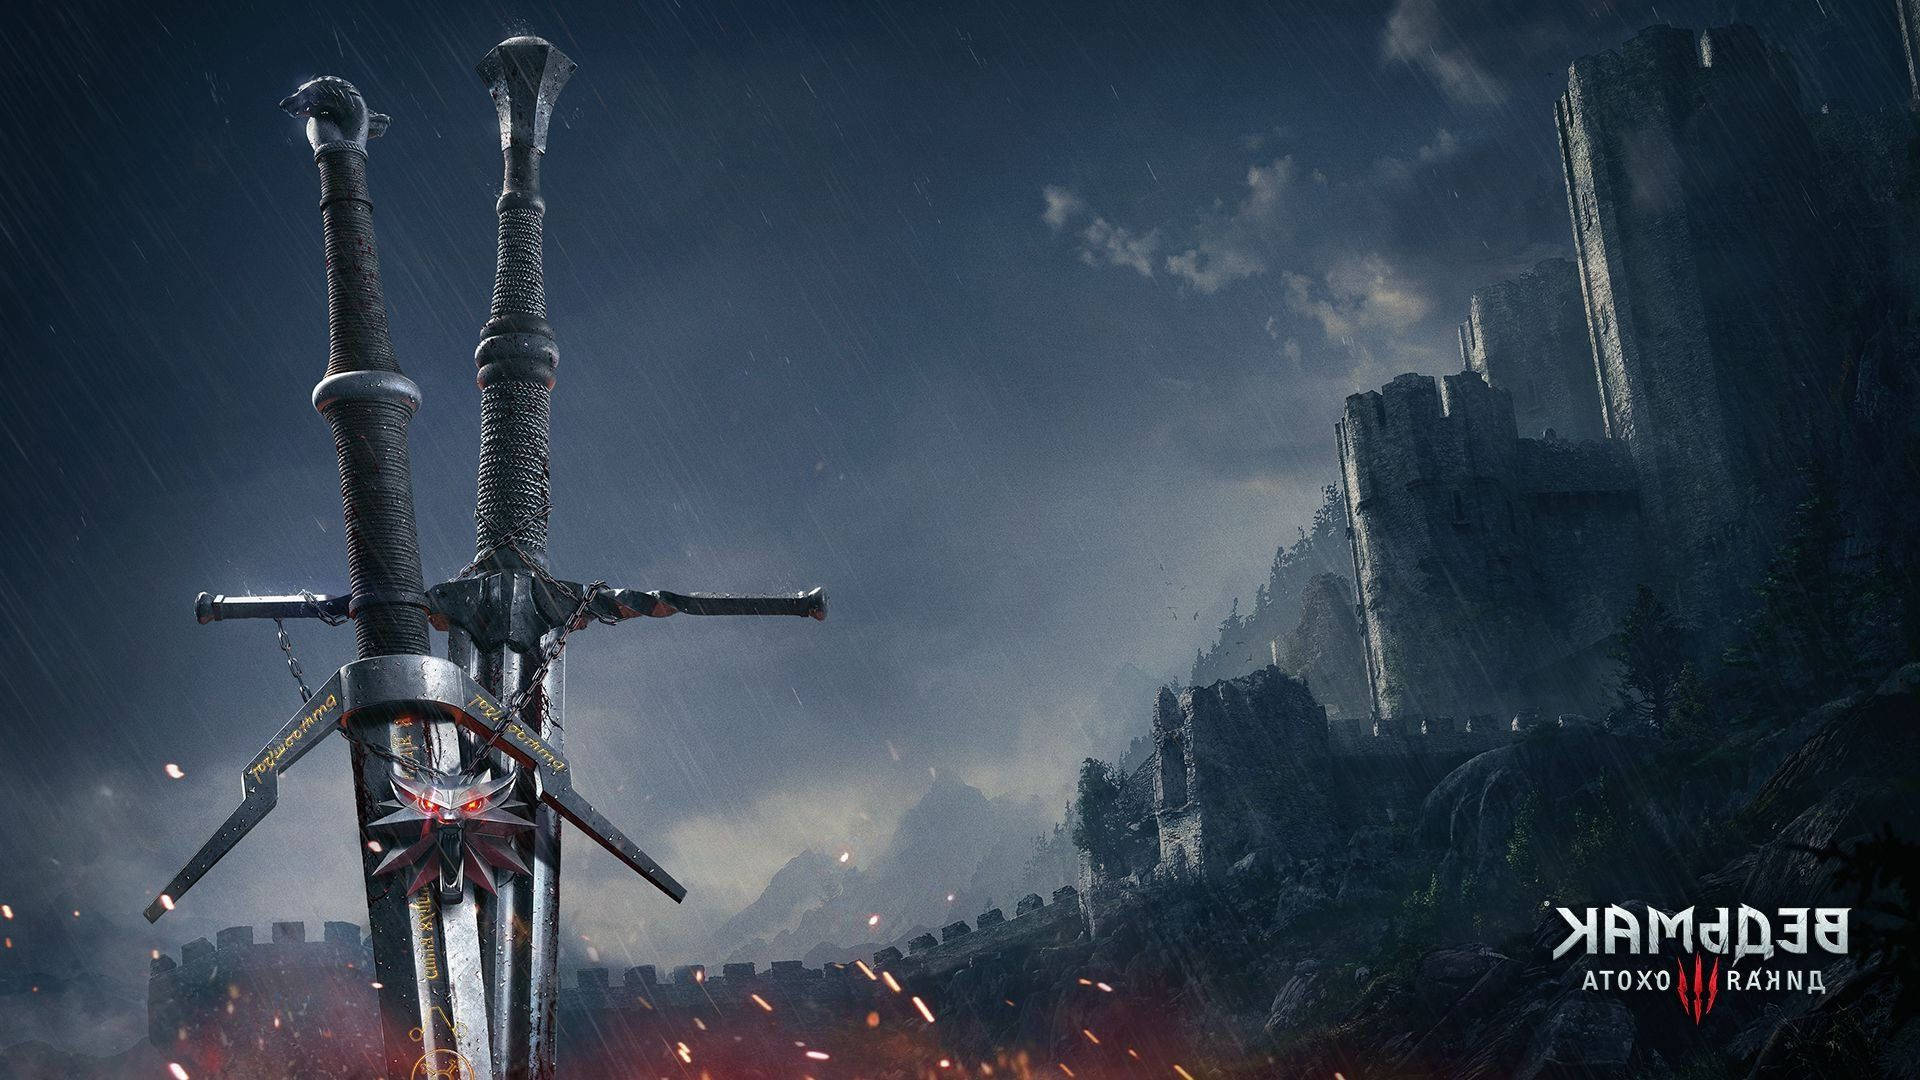 A Sword And A Sword In The Middle Of A Castle Background